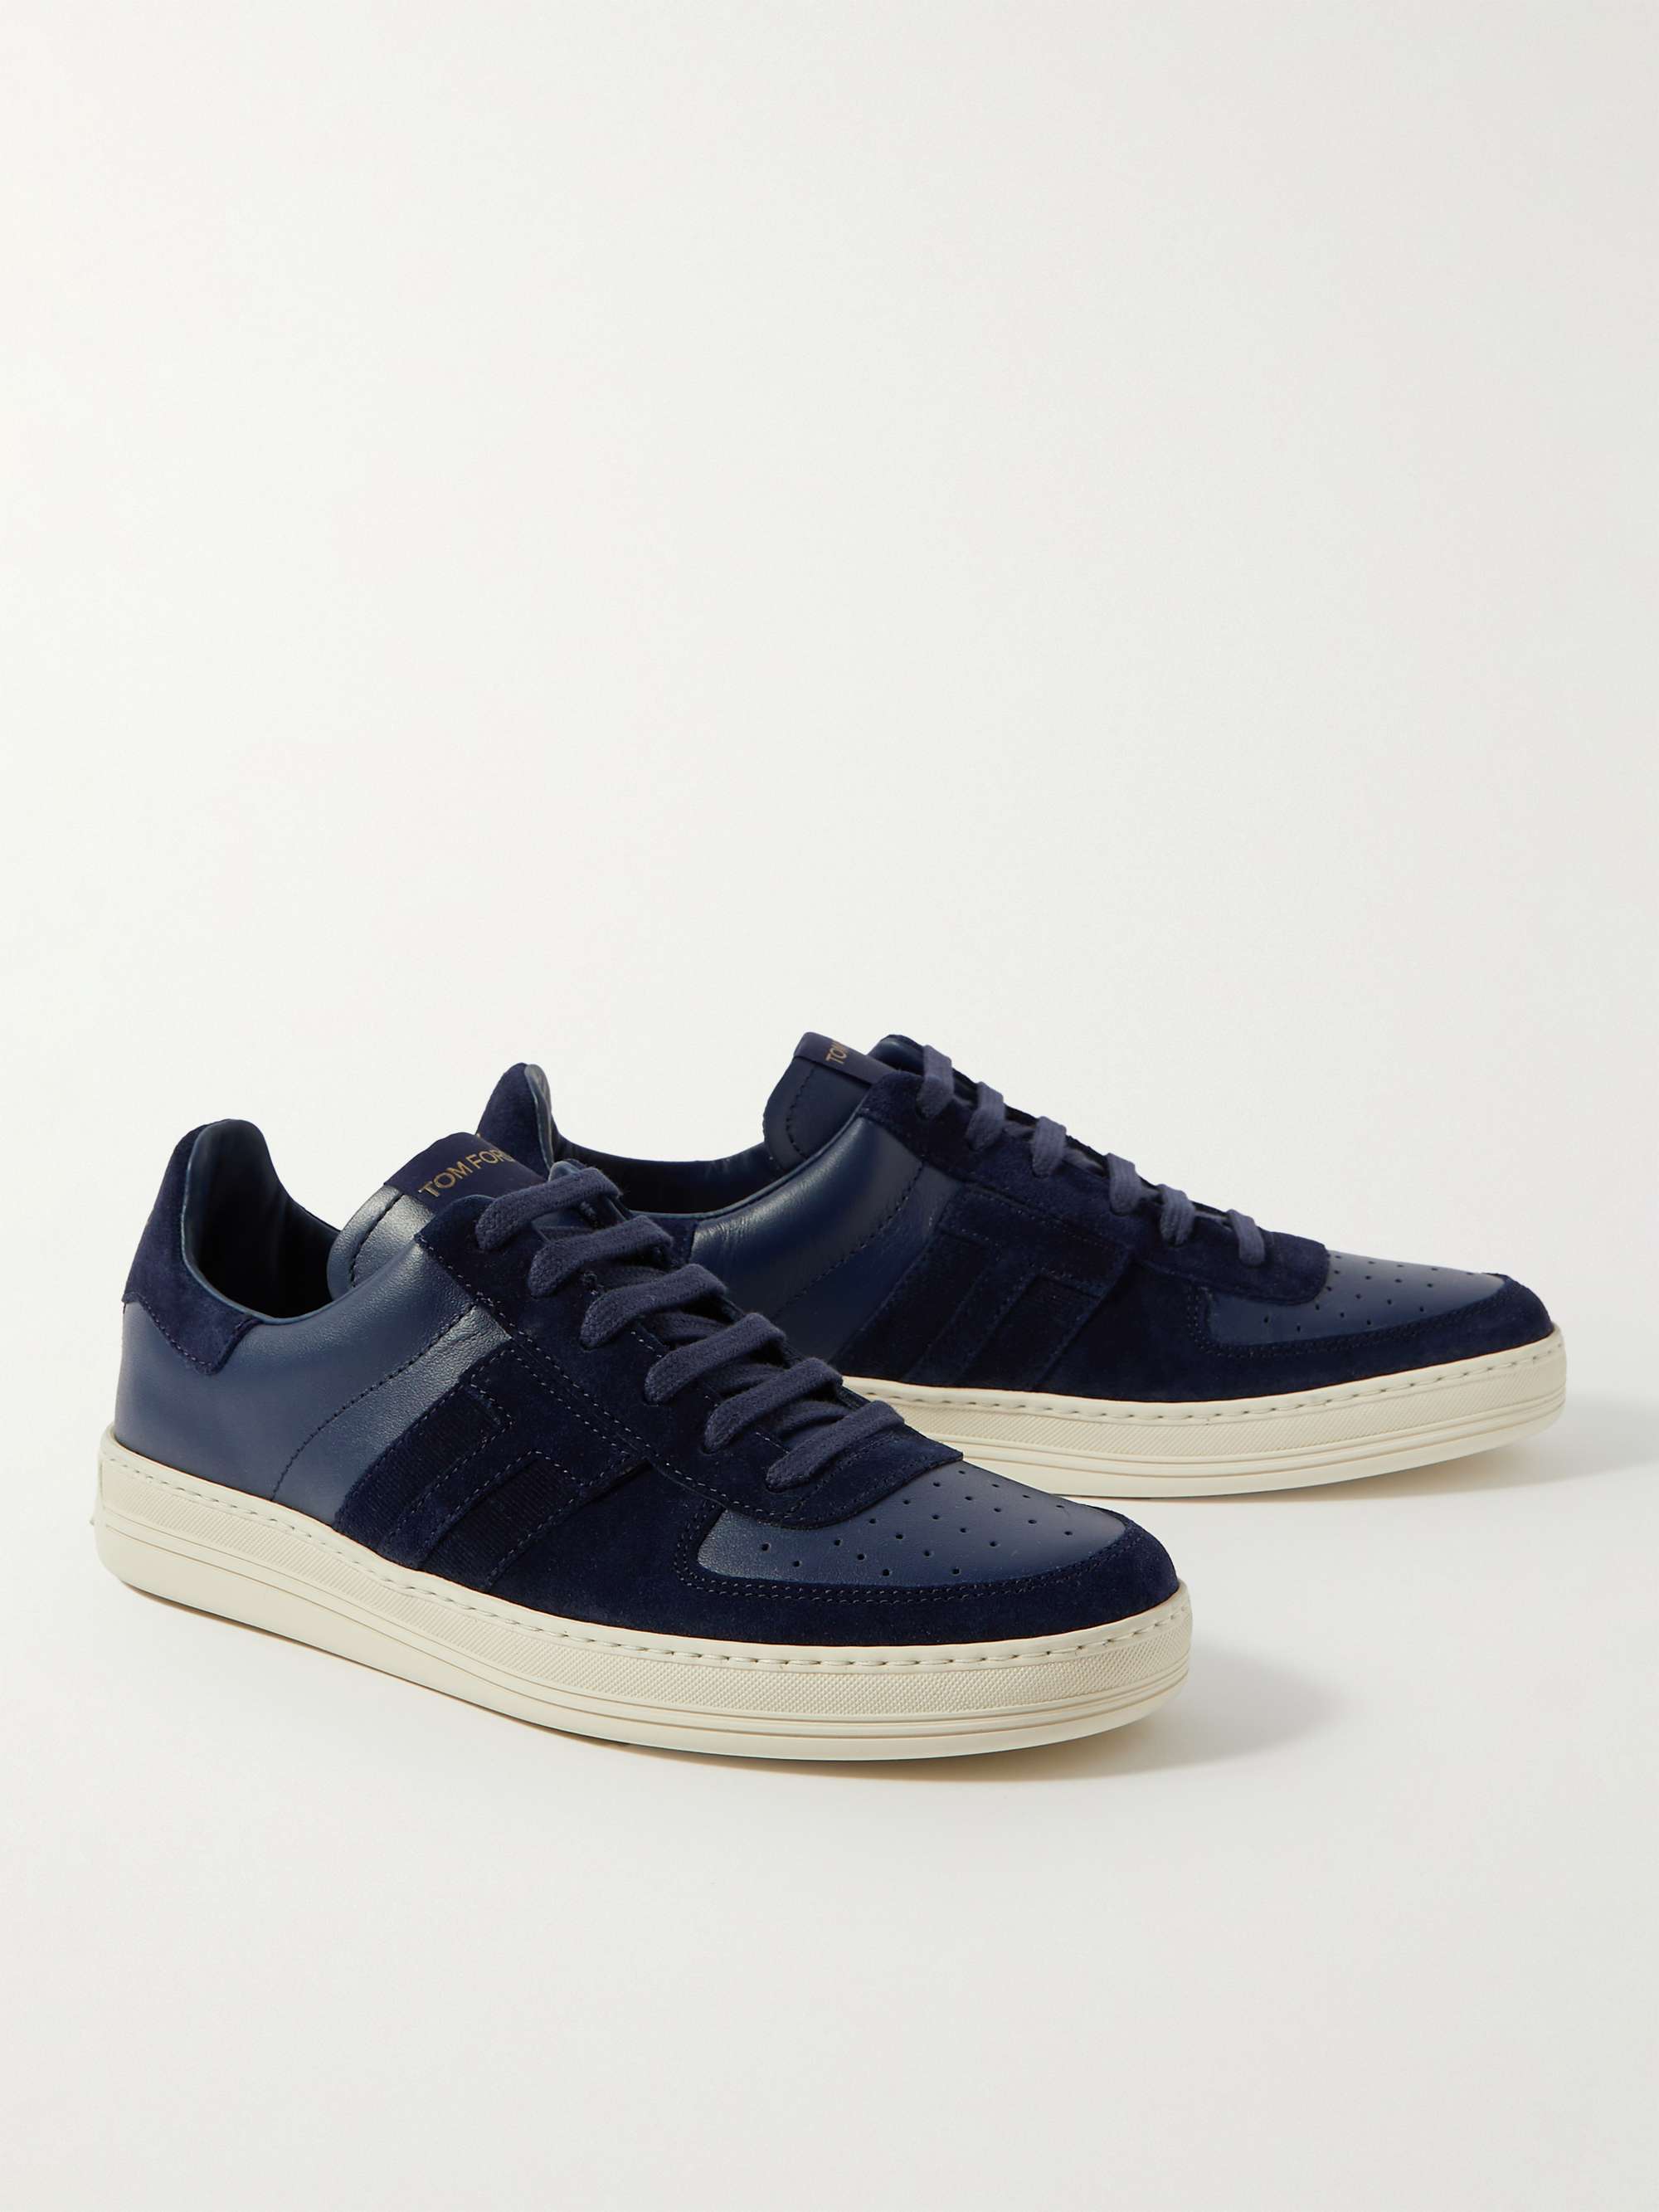 TOM FORD Radcliffe Suede and Leather Sneakers for Men | MR PORTER